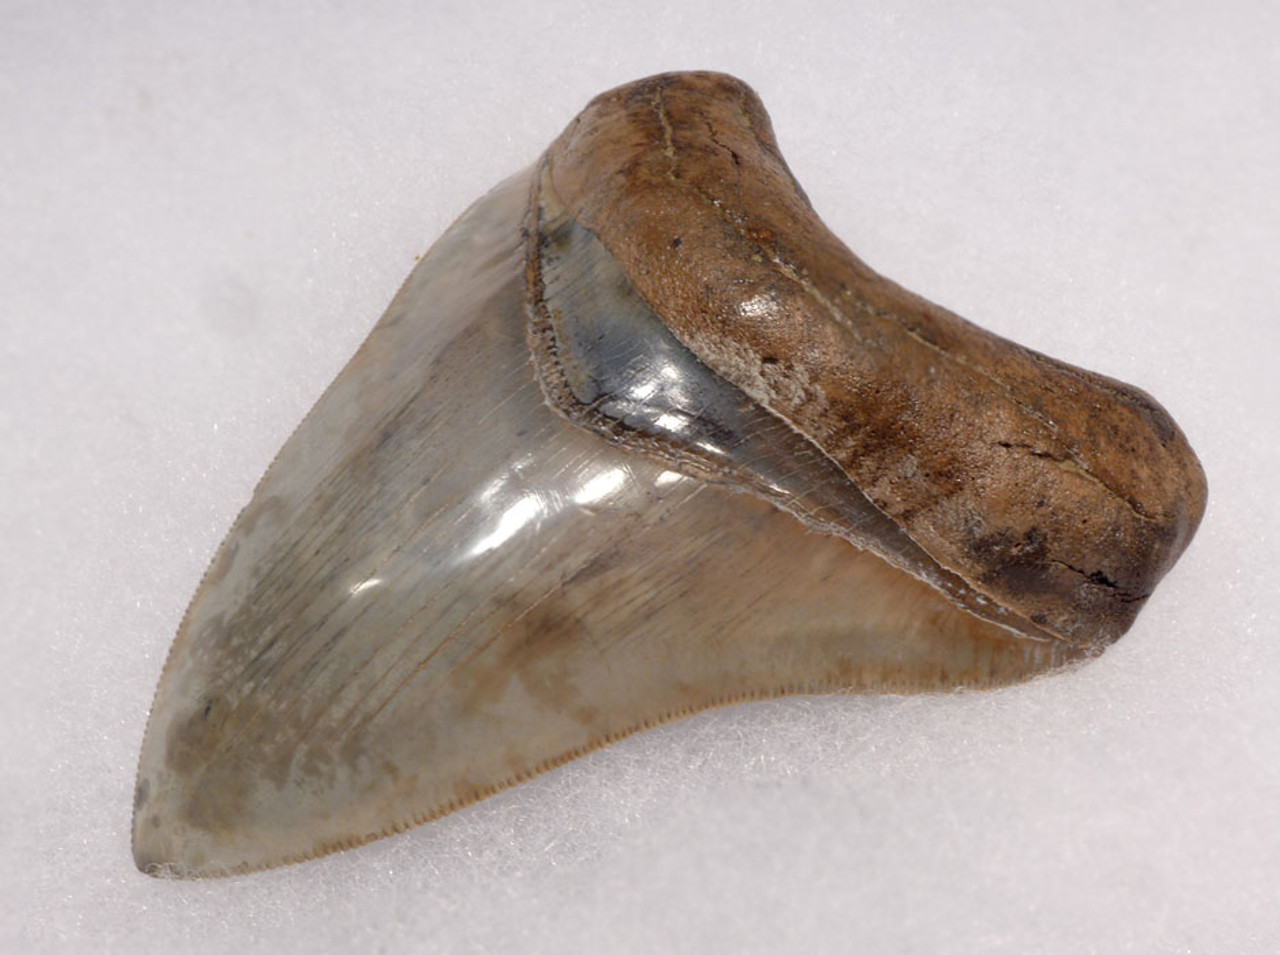 SH6-345 - INVESTMENT GRADE 4 INCH SPOTTED BLUE-GRAY MEGALODON SHARK TOOTH